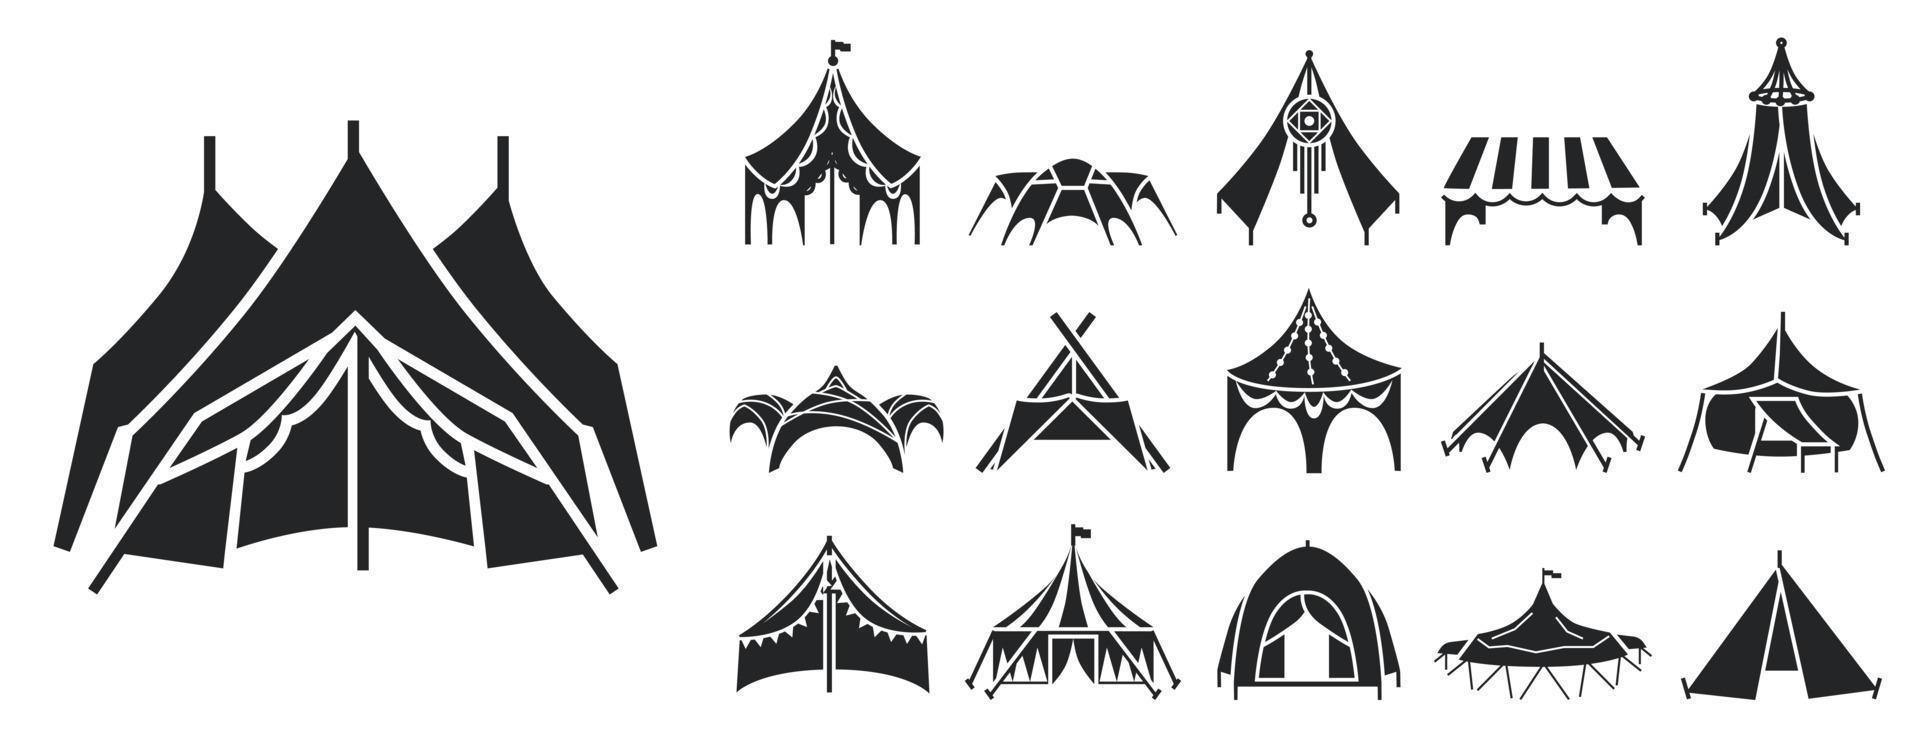 Canopy icon set, simple style vector